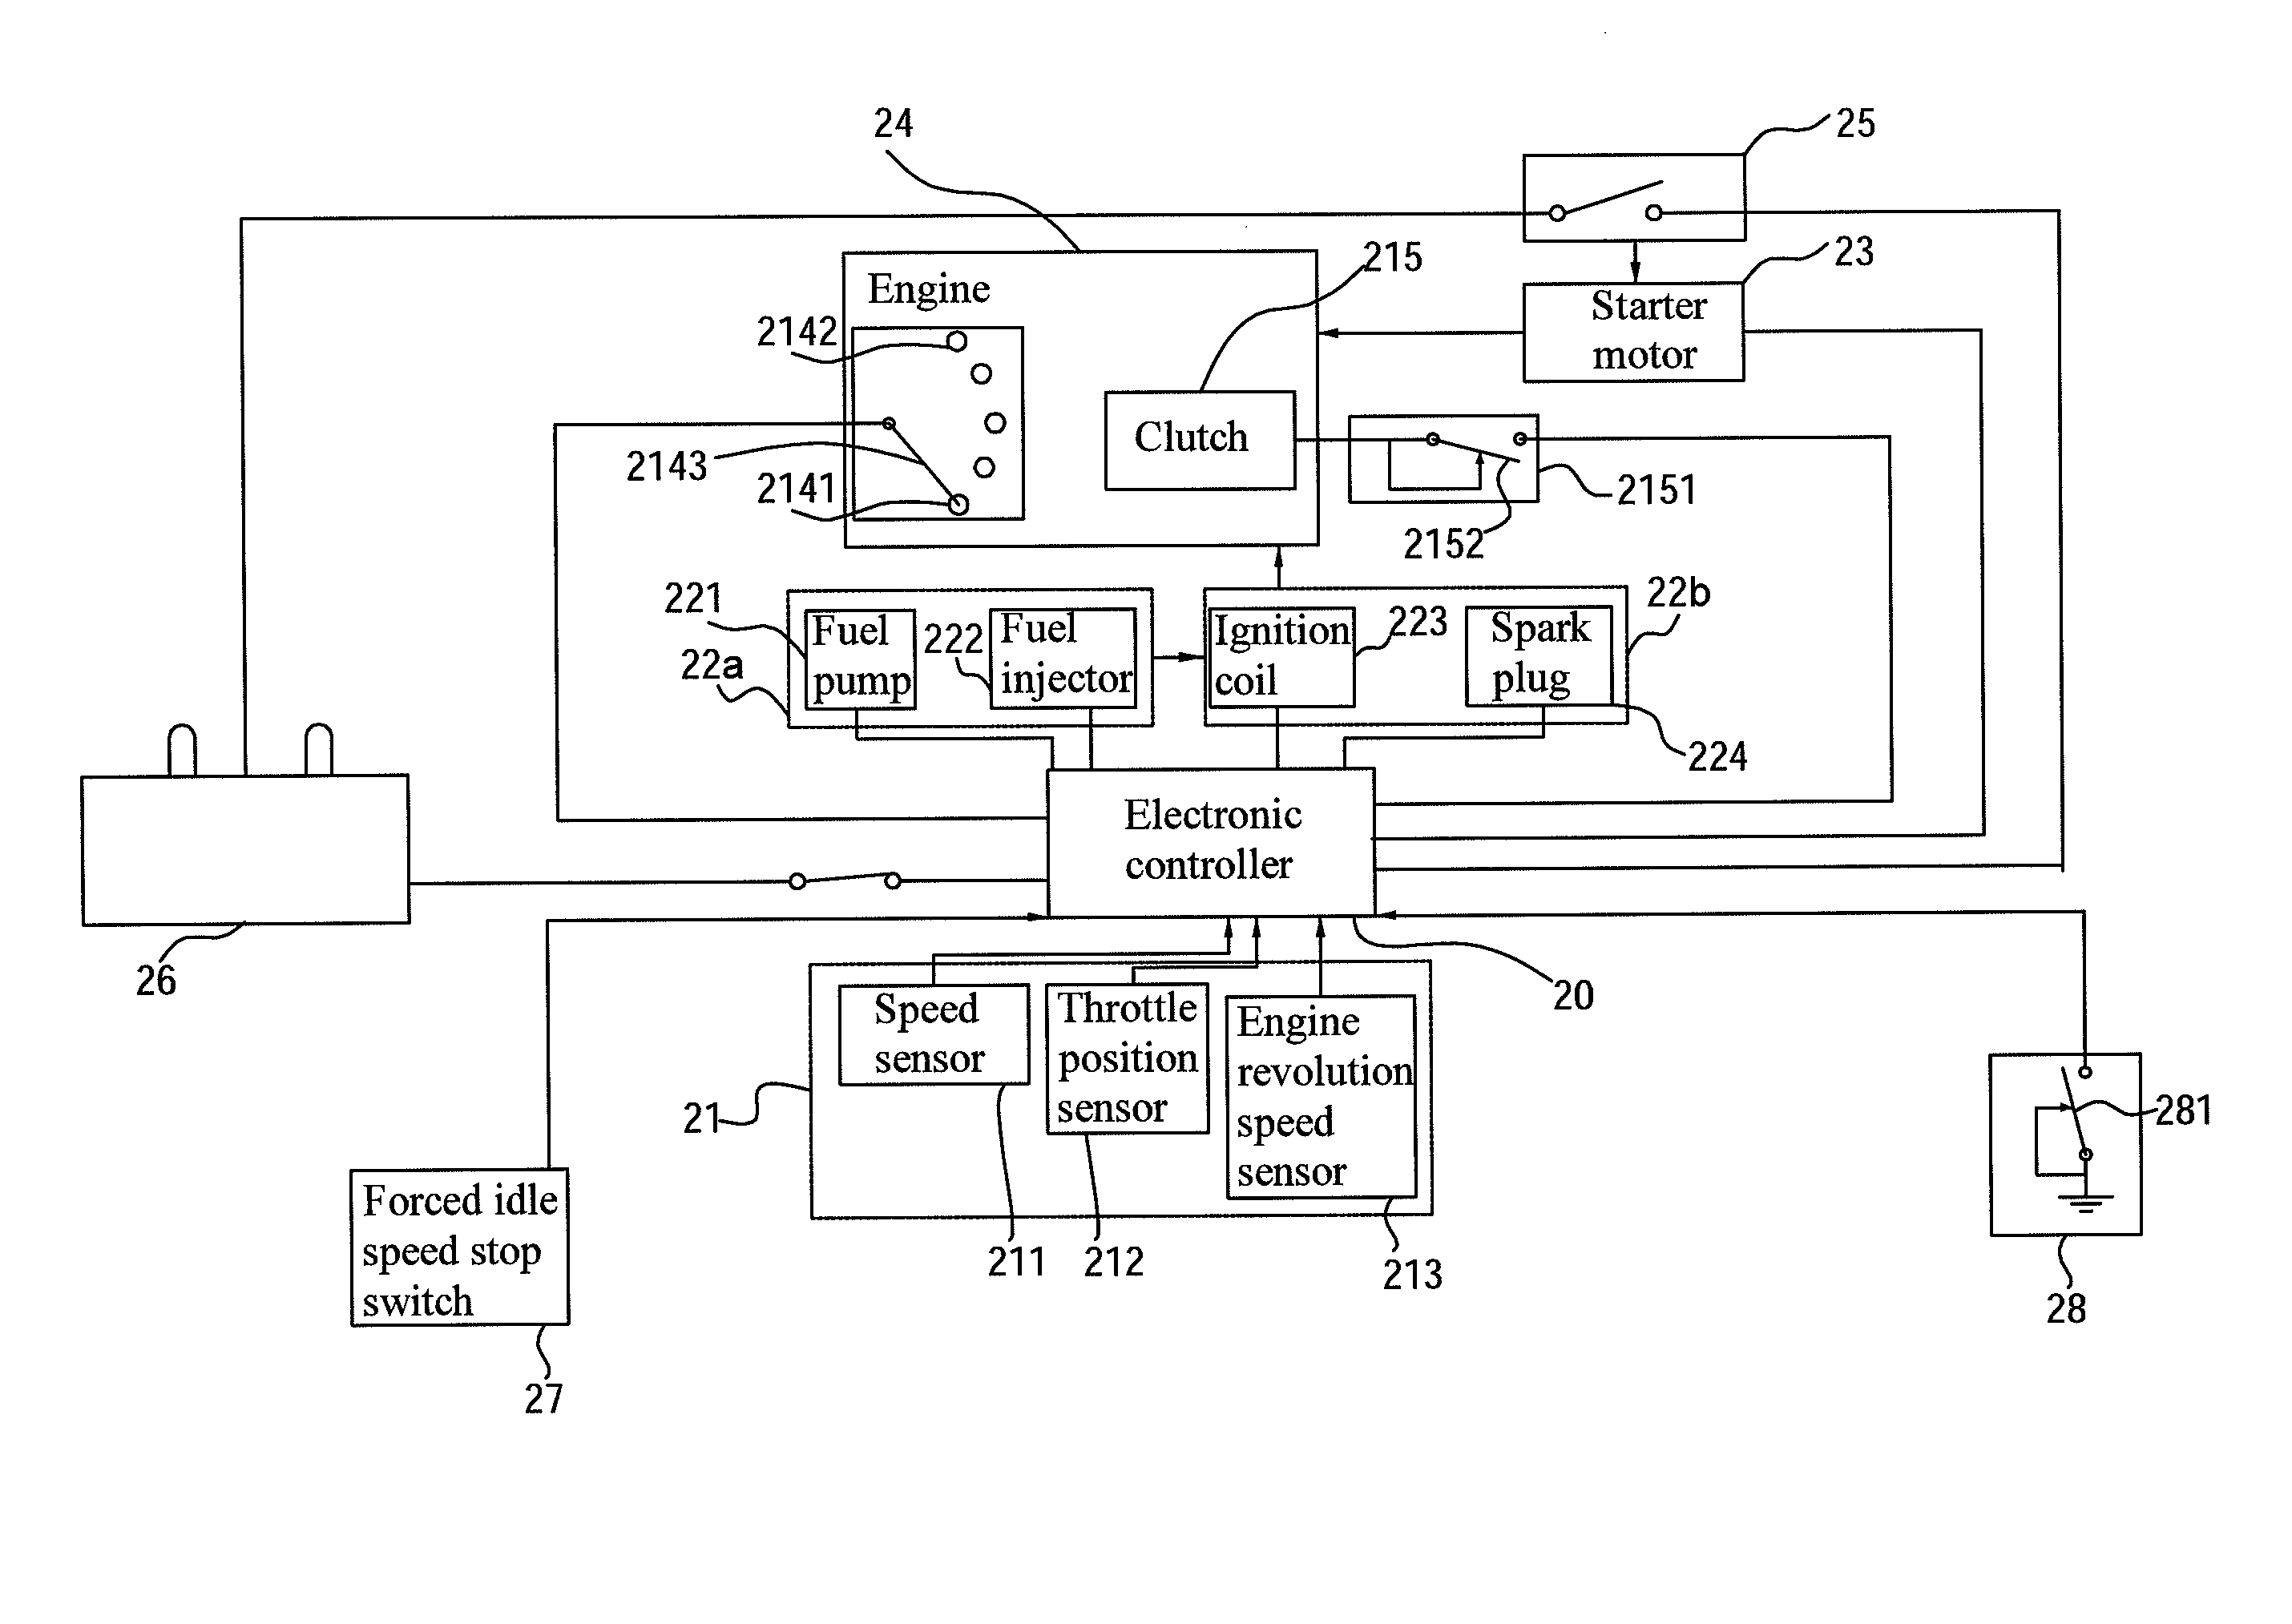 Engine idle speed control system and method for vehicular gear